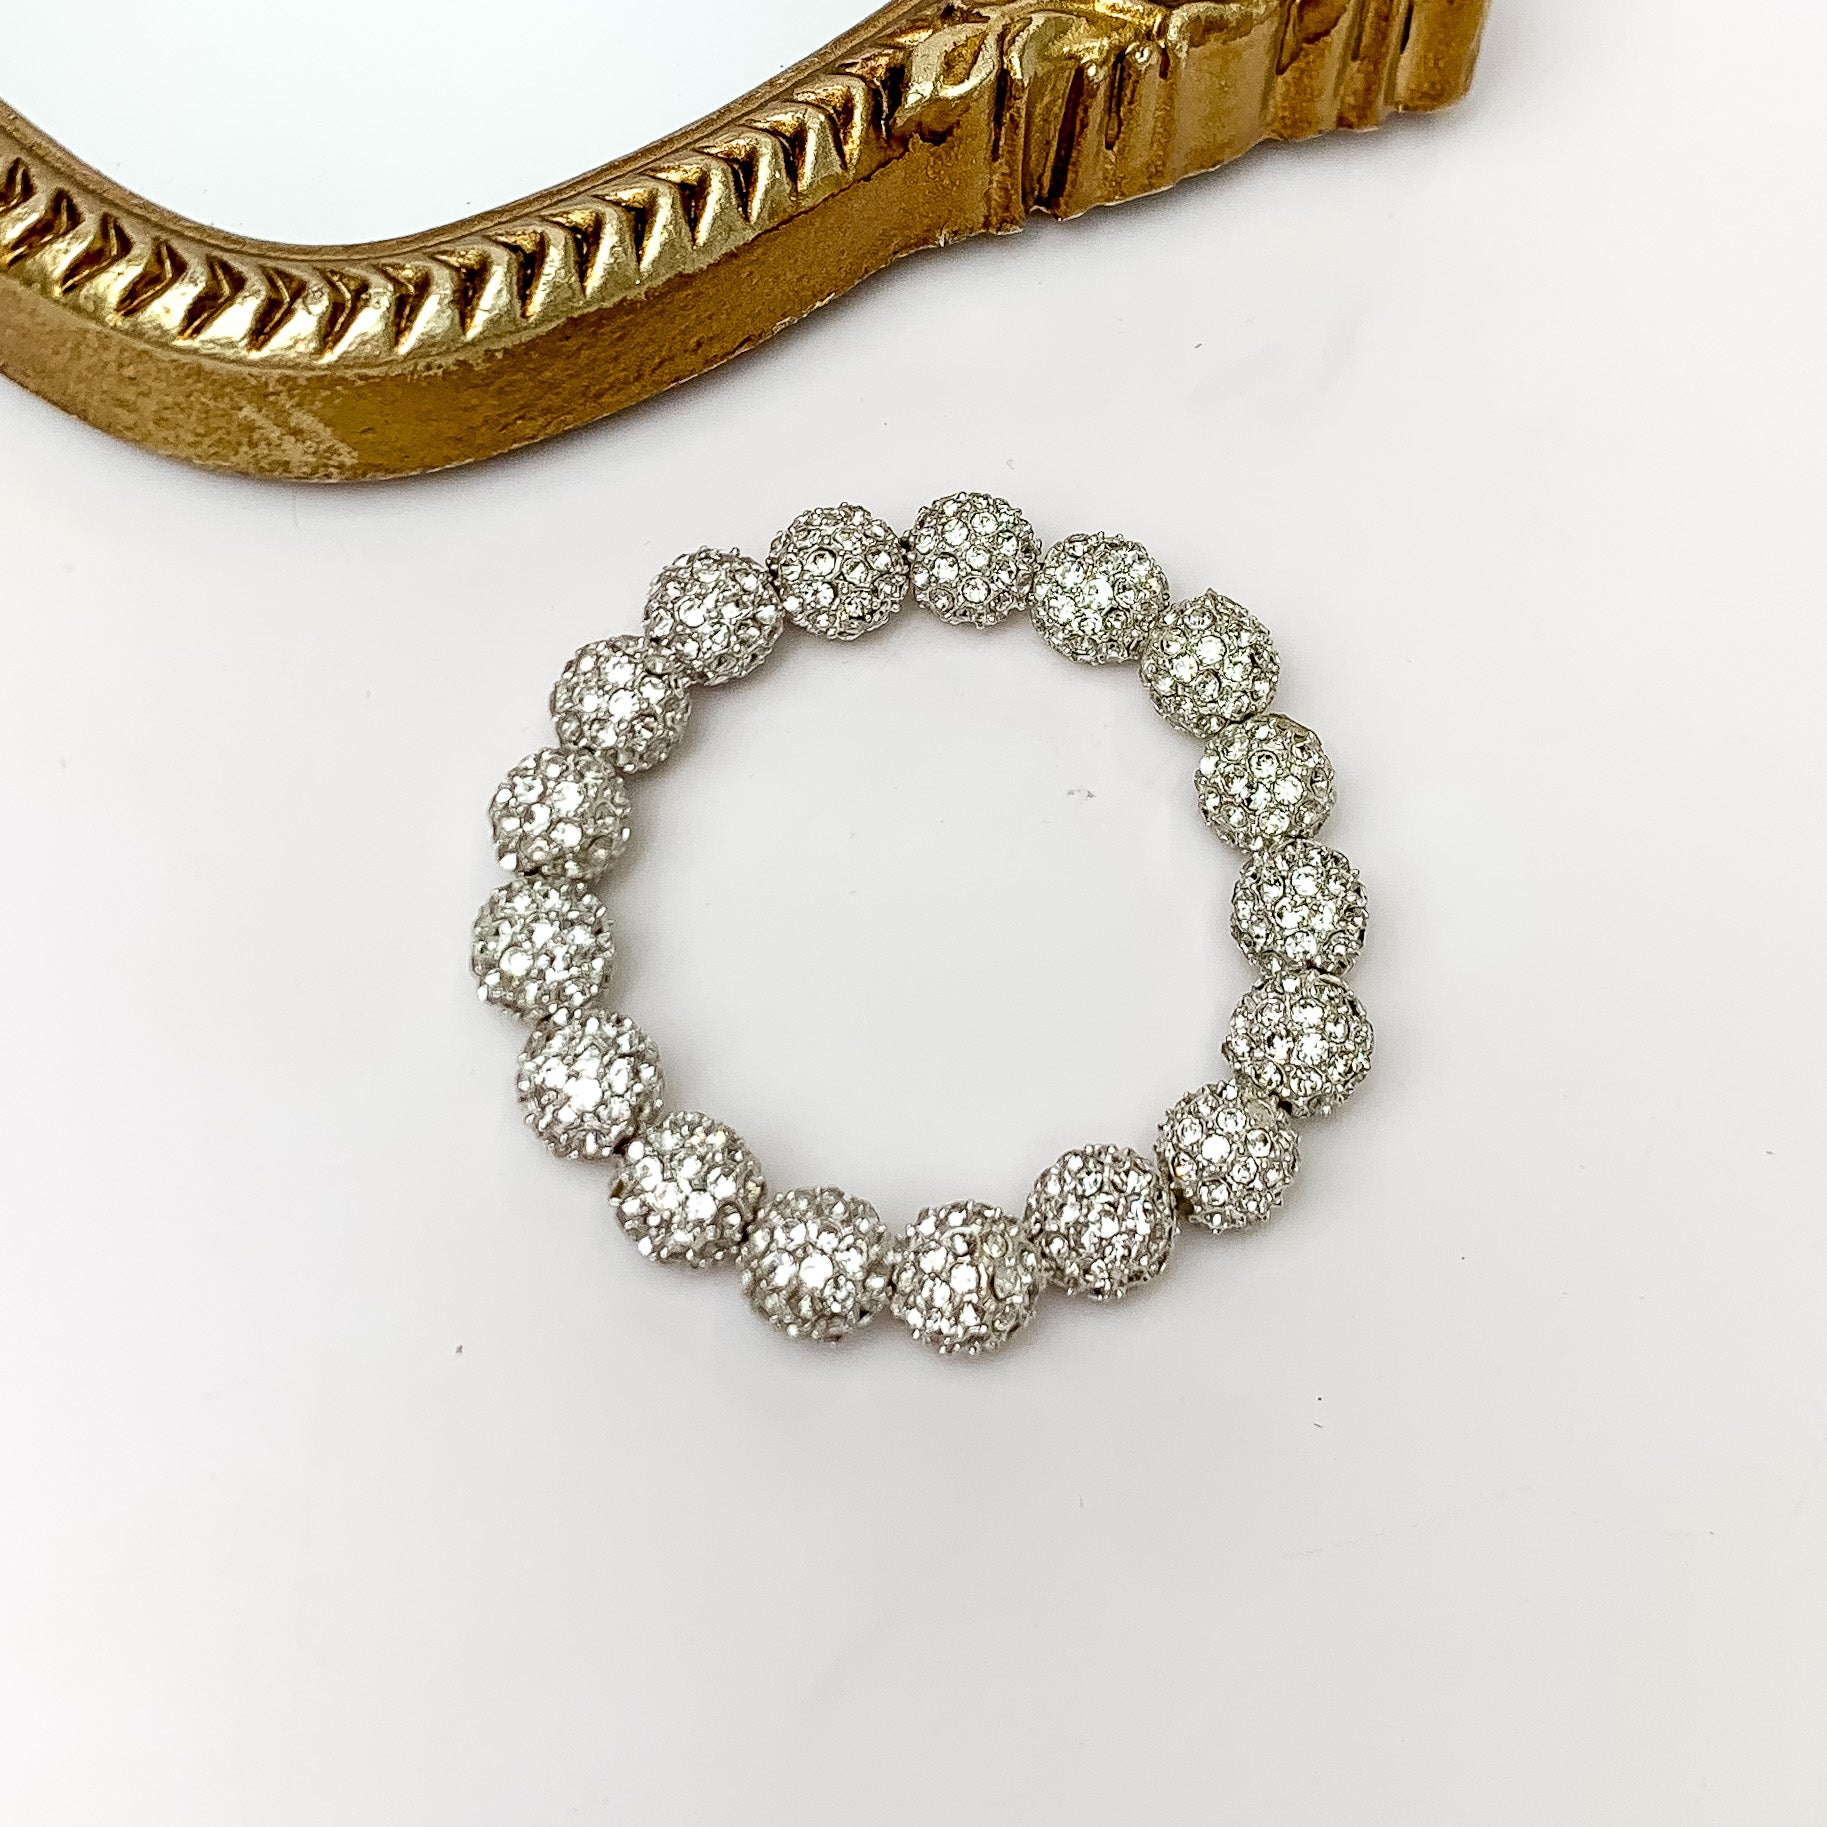 Clear Crystal Beaded Bracelet in Silver Tone - Giddy Up Glamour Boutique